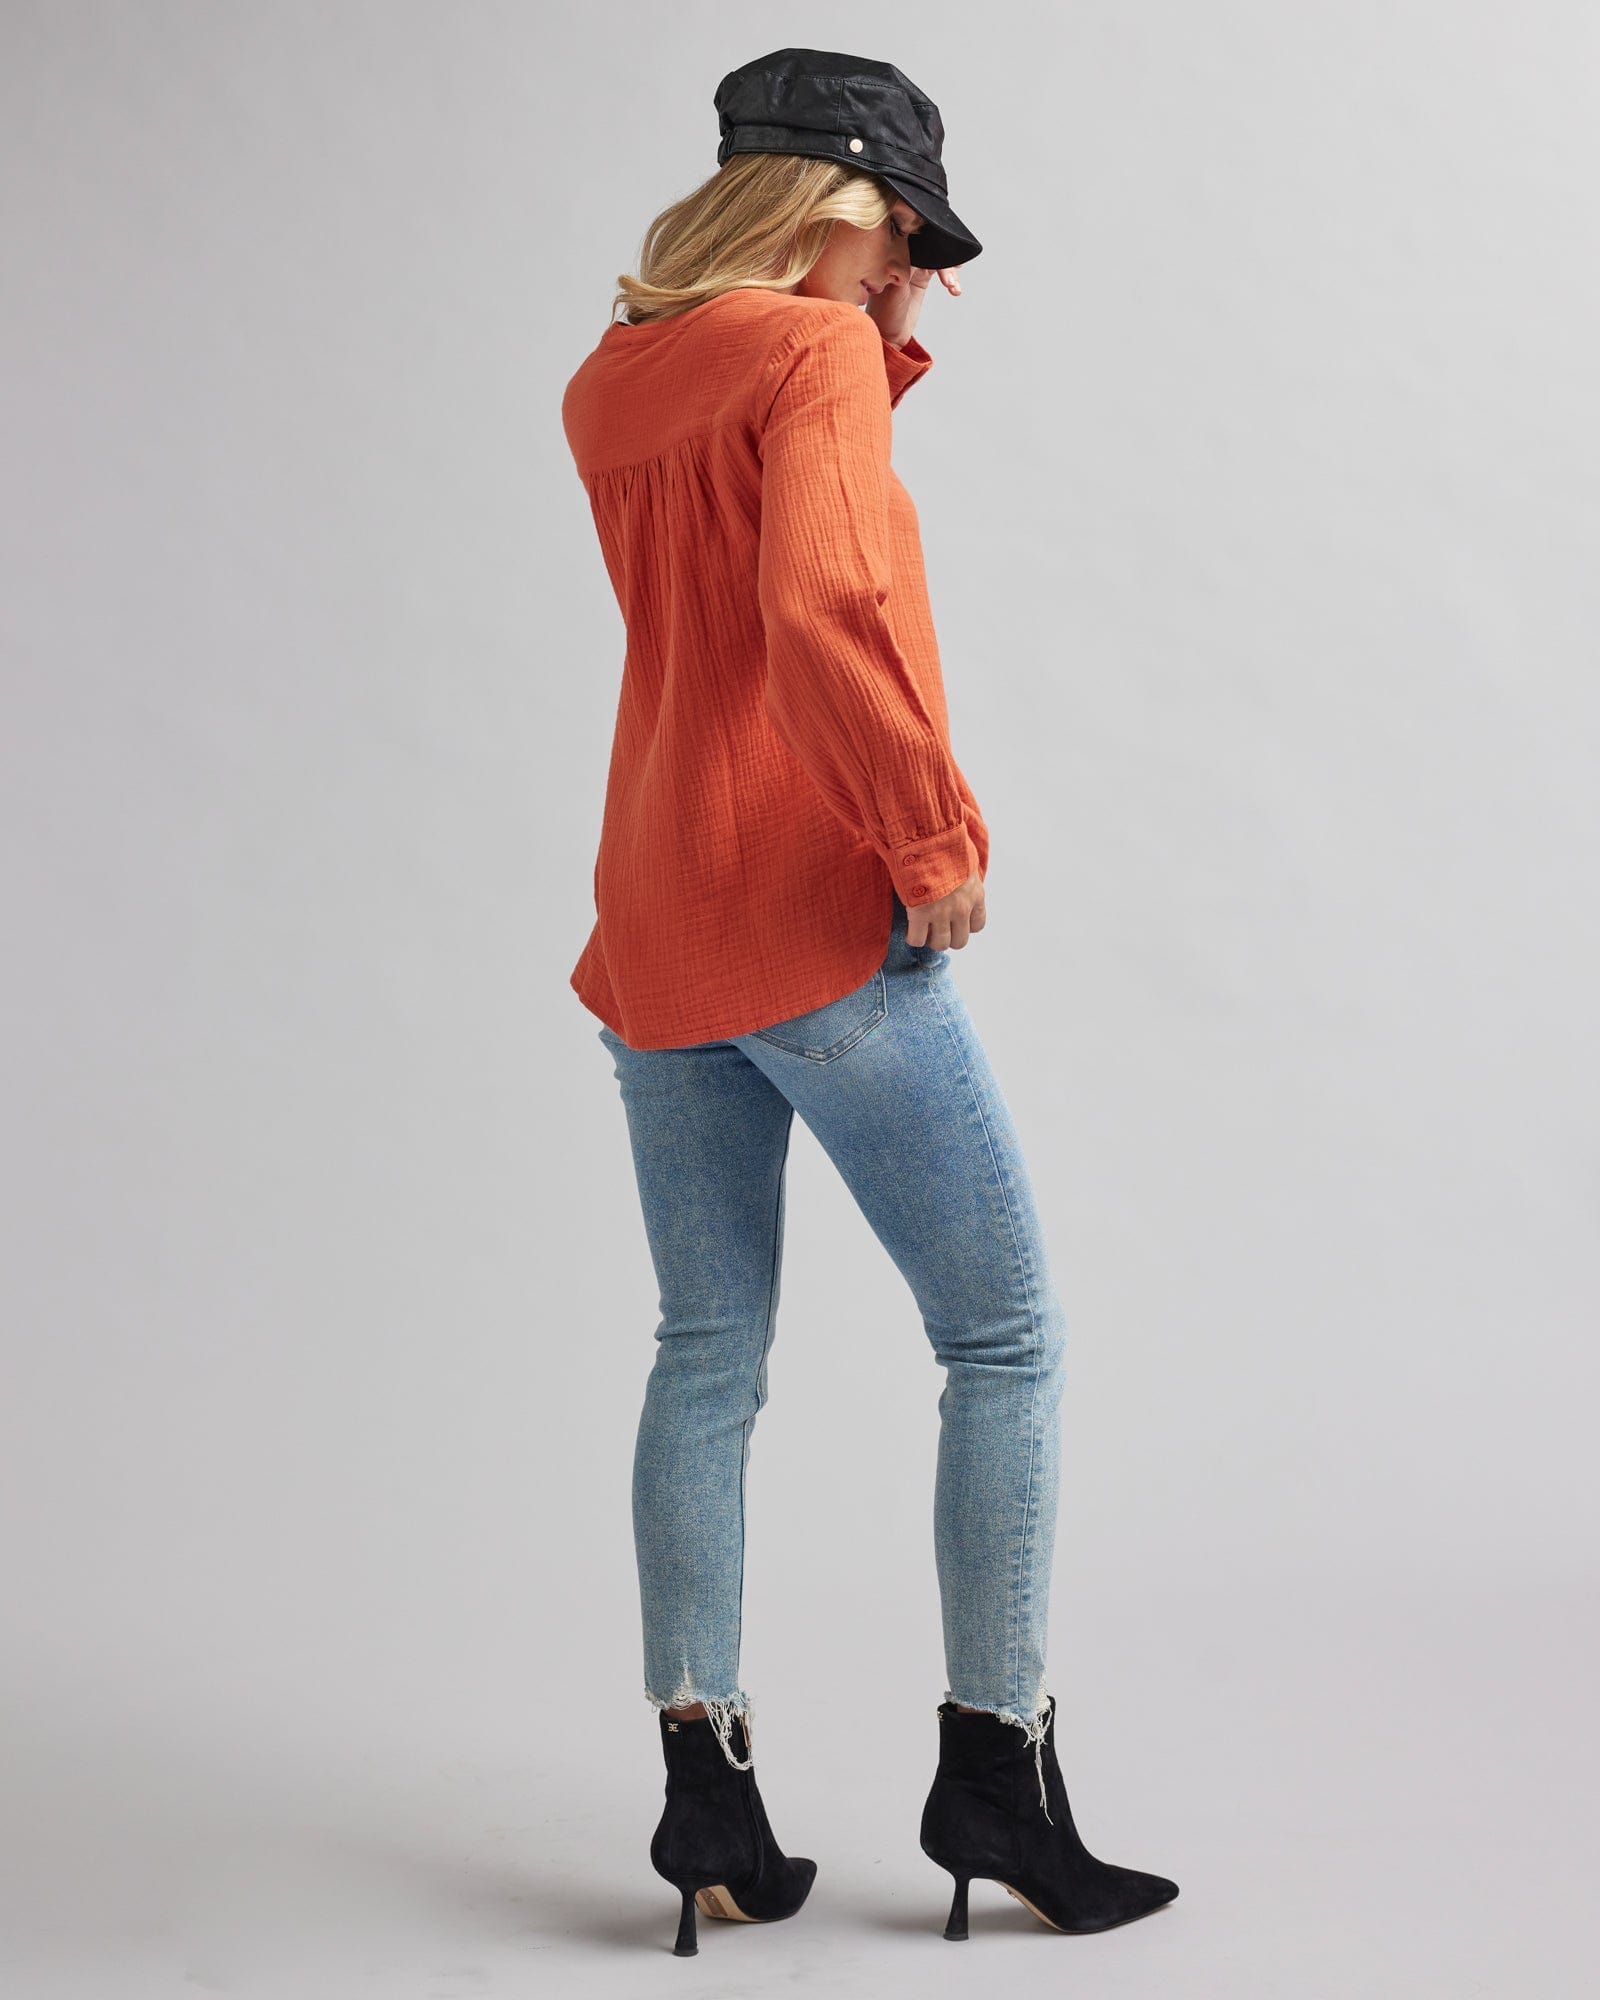 Woman in a long sleeve, orange, textured blouse